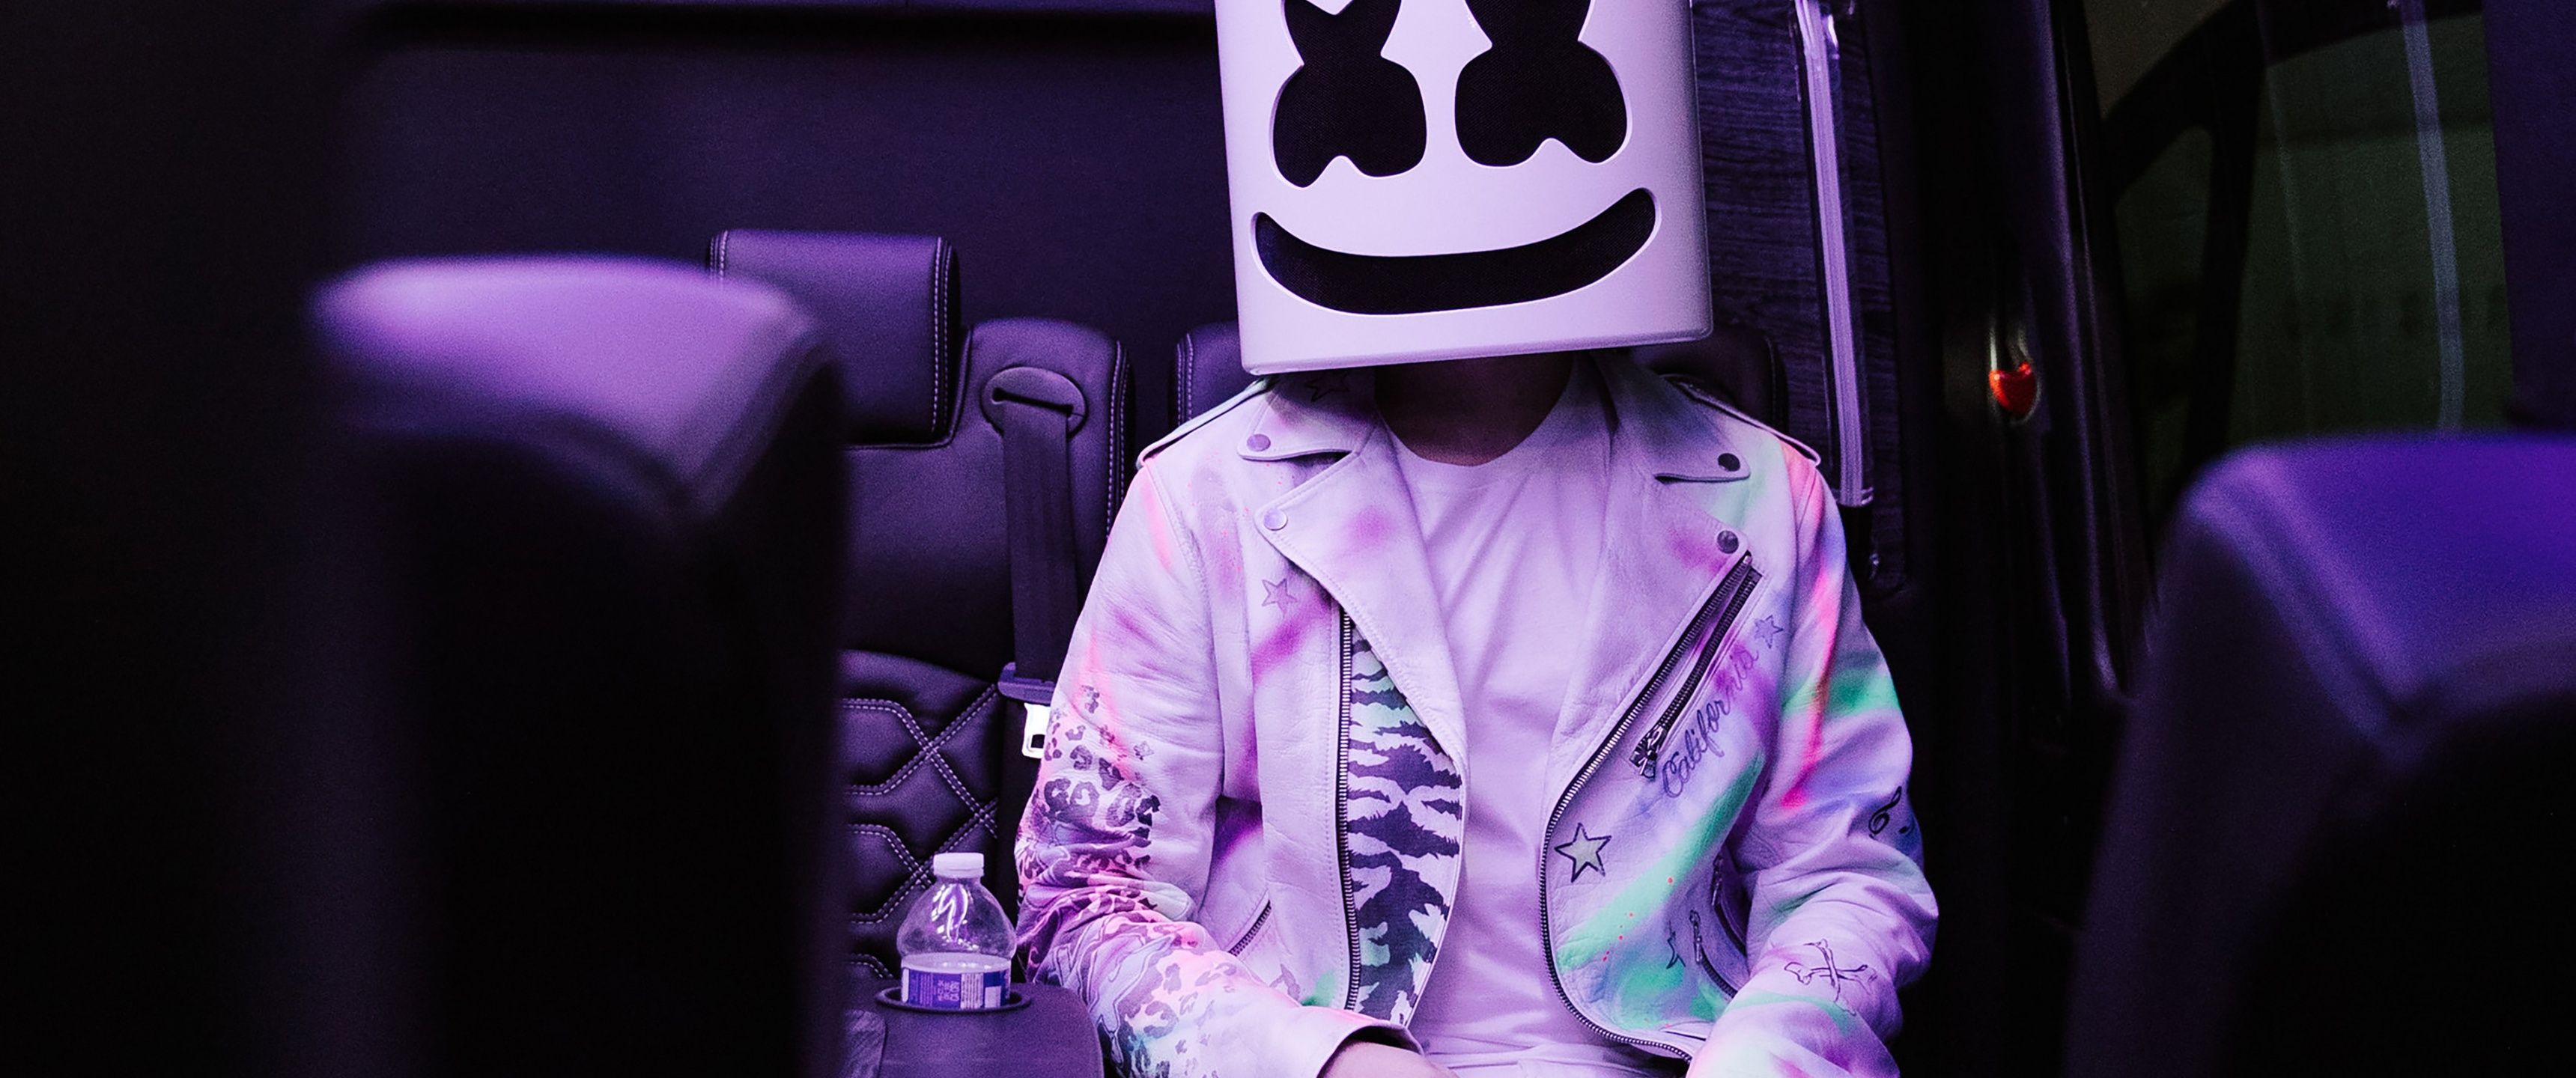 Marshmello sitting in a bus seat with a smiley face for a head - Marshmello